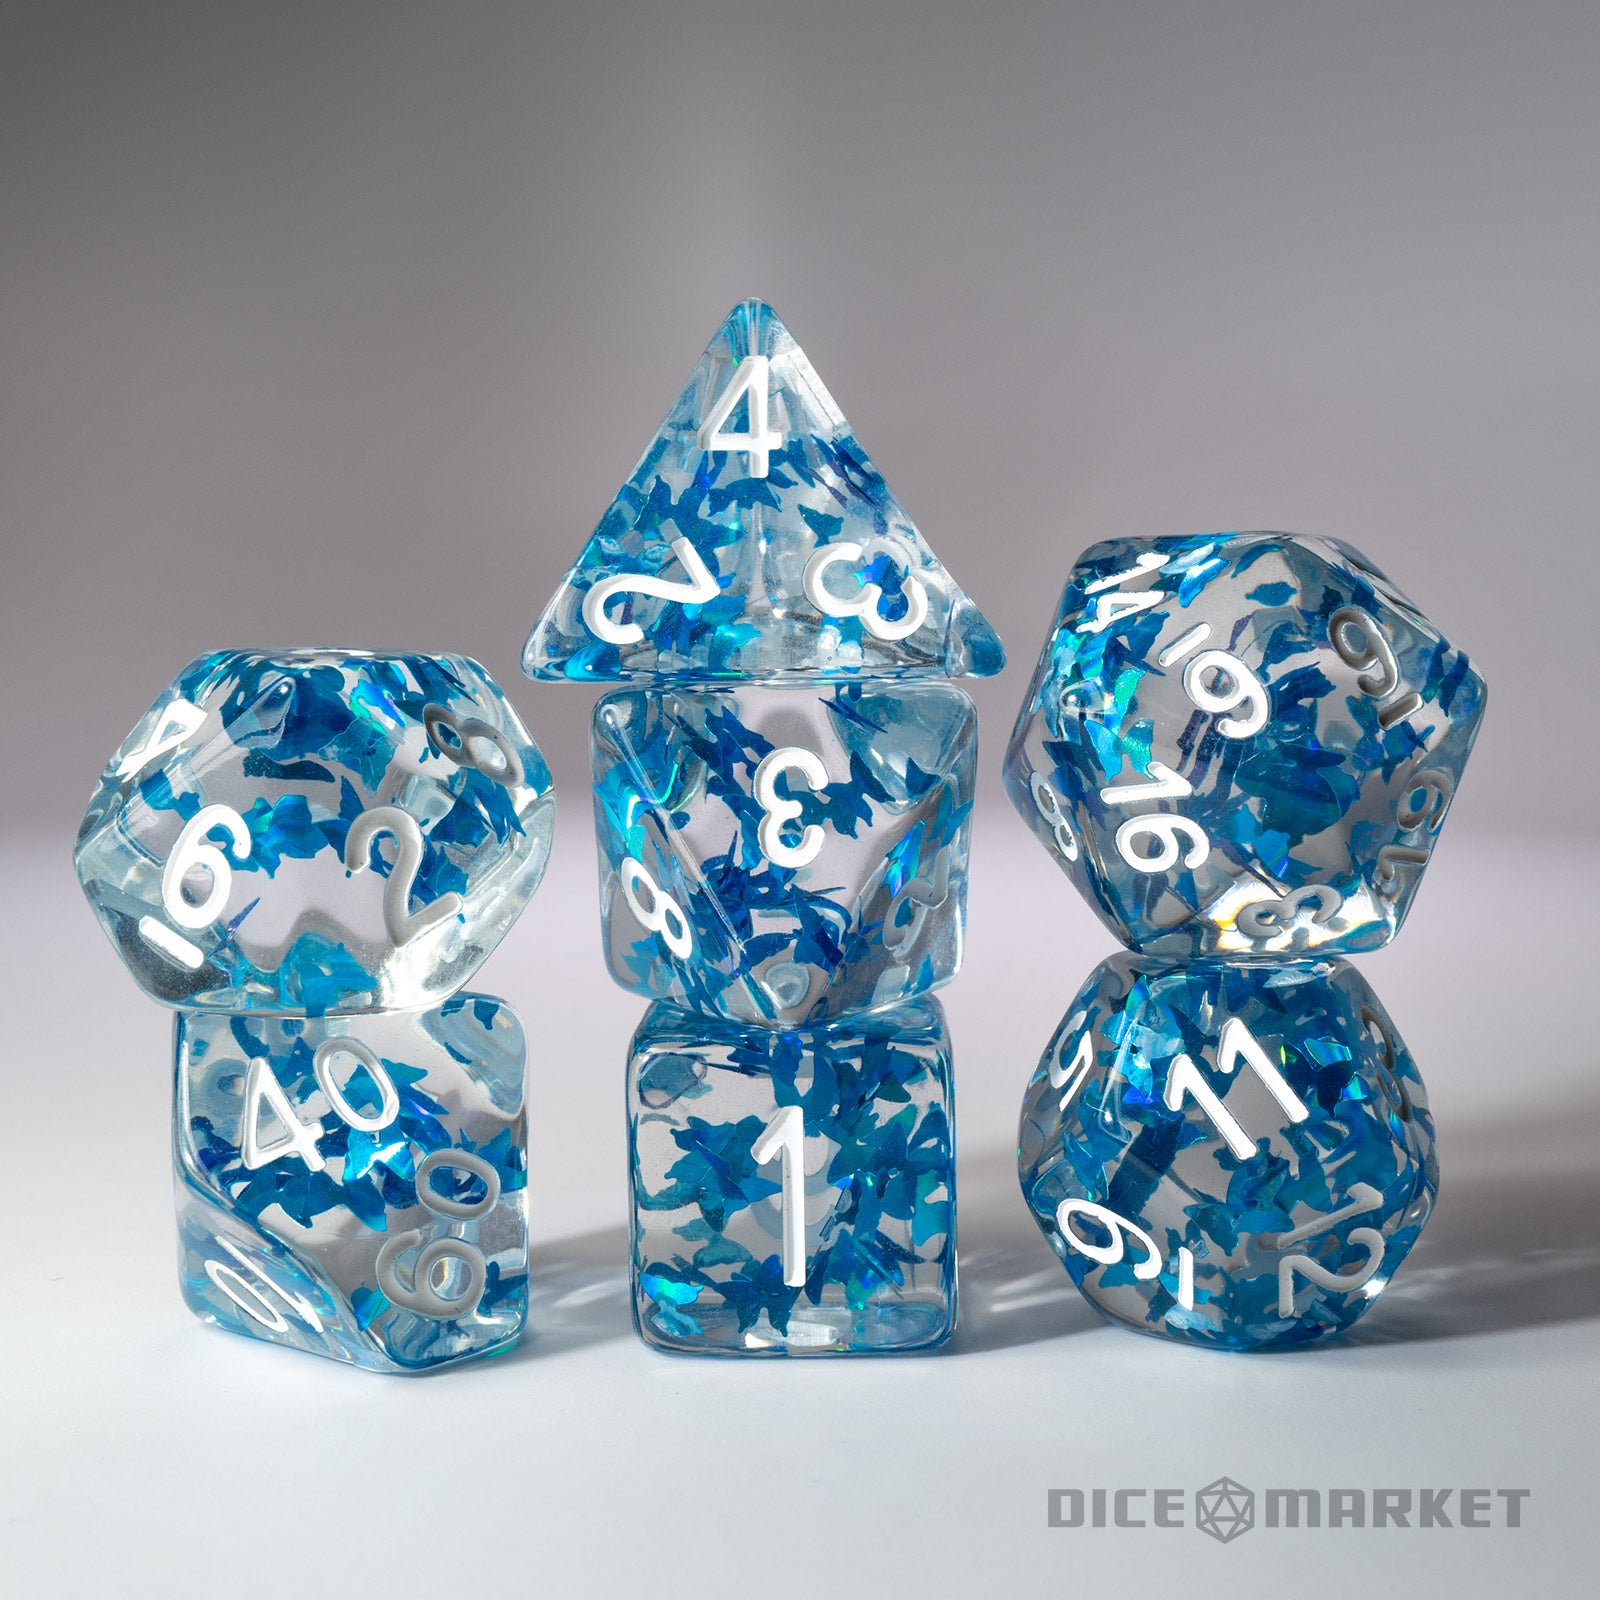 Blue Butterflies Filled 7pc Polyhedral Dice Set with White Ink